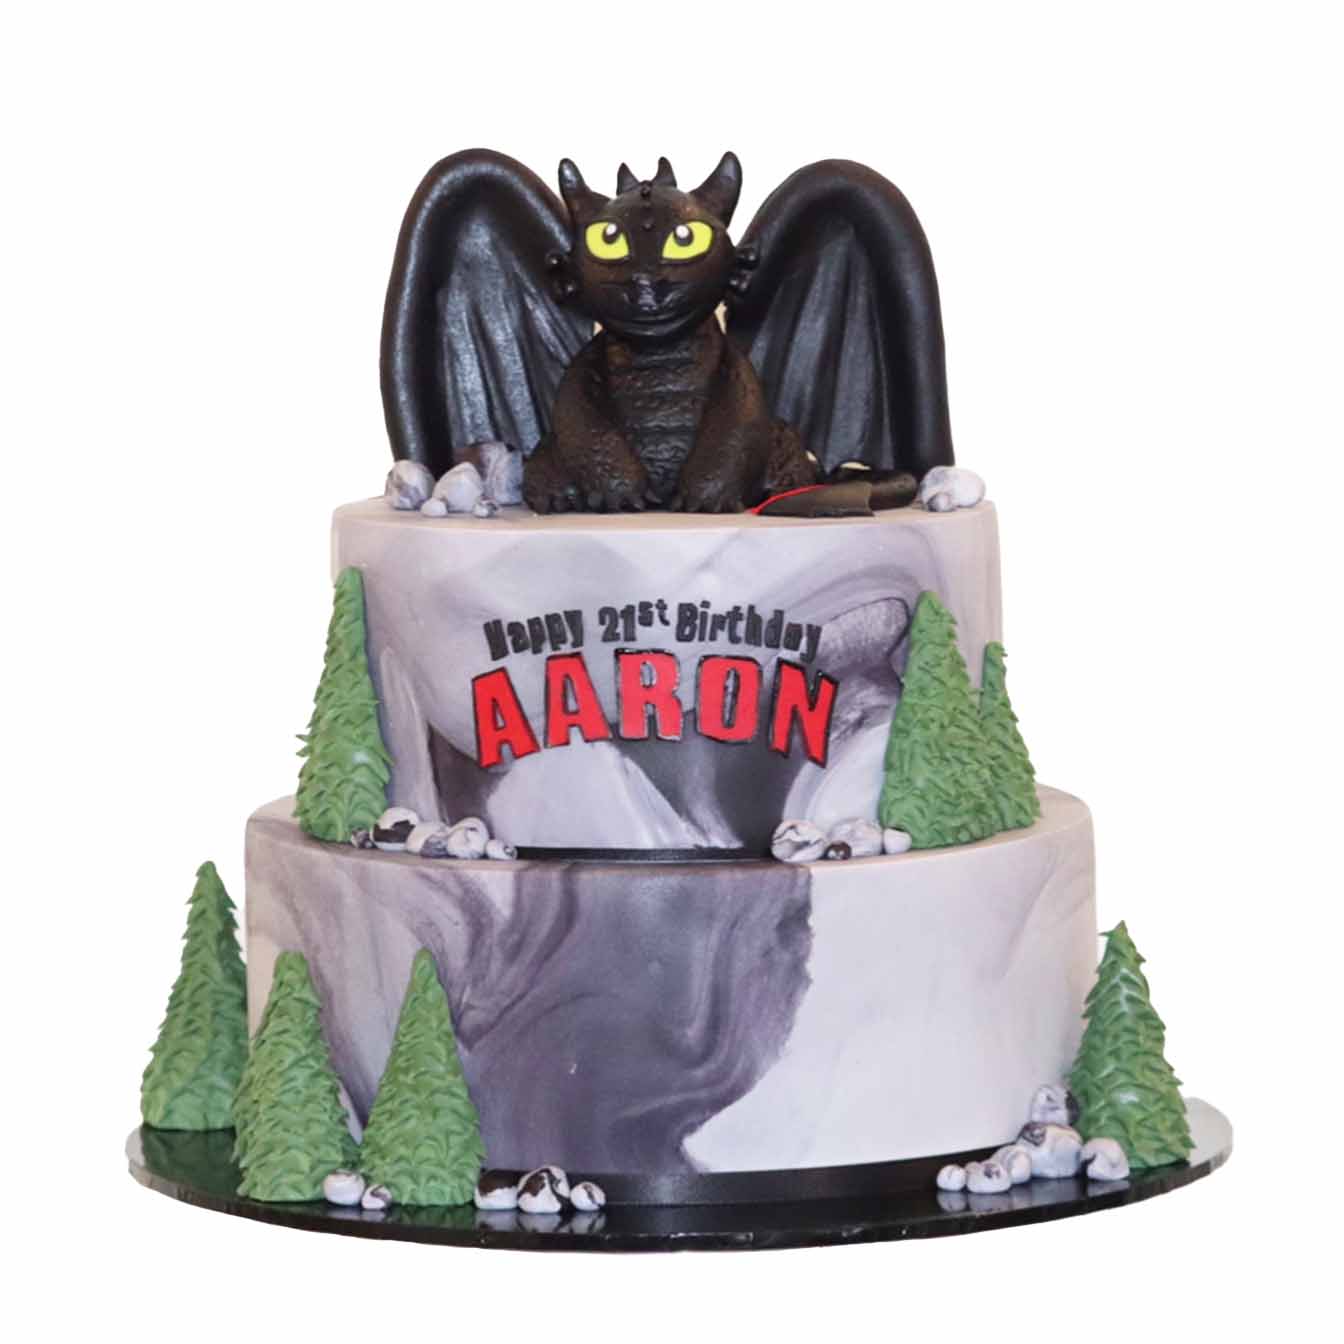 Dragon's Lair Adventure Cake - A cake with marbled rock-like fondant tiers, 3D trees, and a moulded Toothless dragon on top, bringing the magic of 'How to Train Your Dragon' to life.